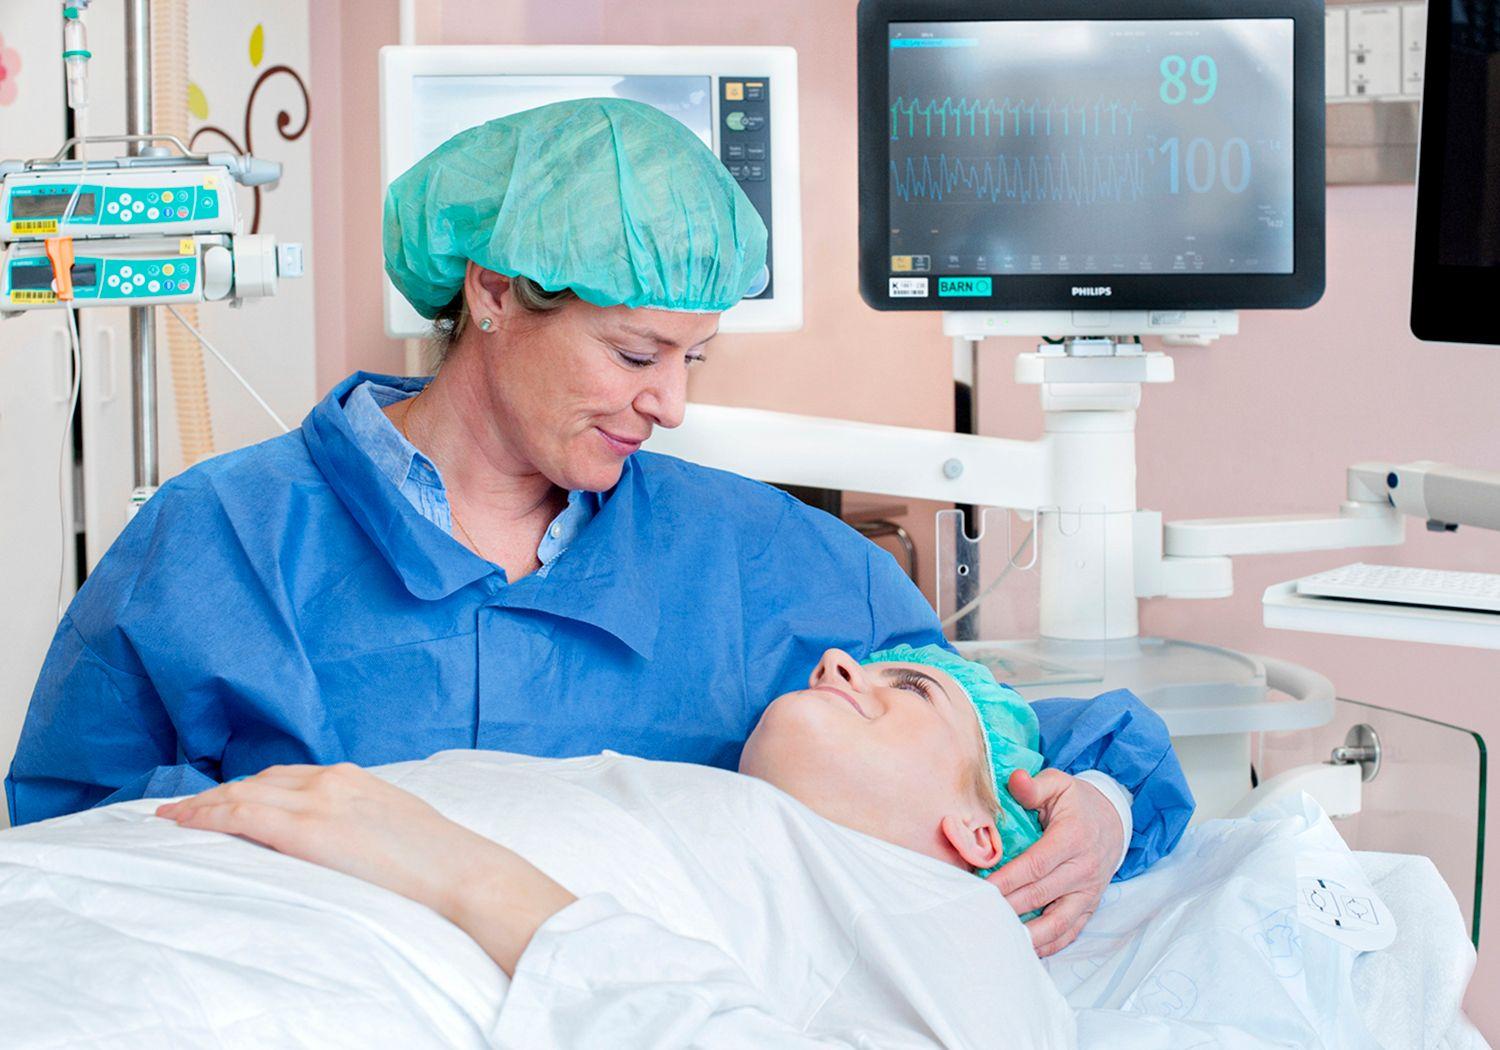 Teenage girl lying on an operating table. Her mother is beside the bed wearing scrubs and scrub cap.